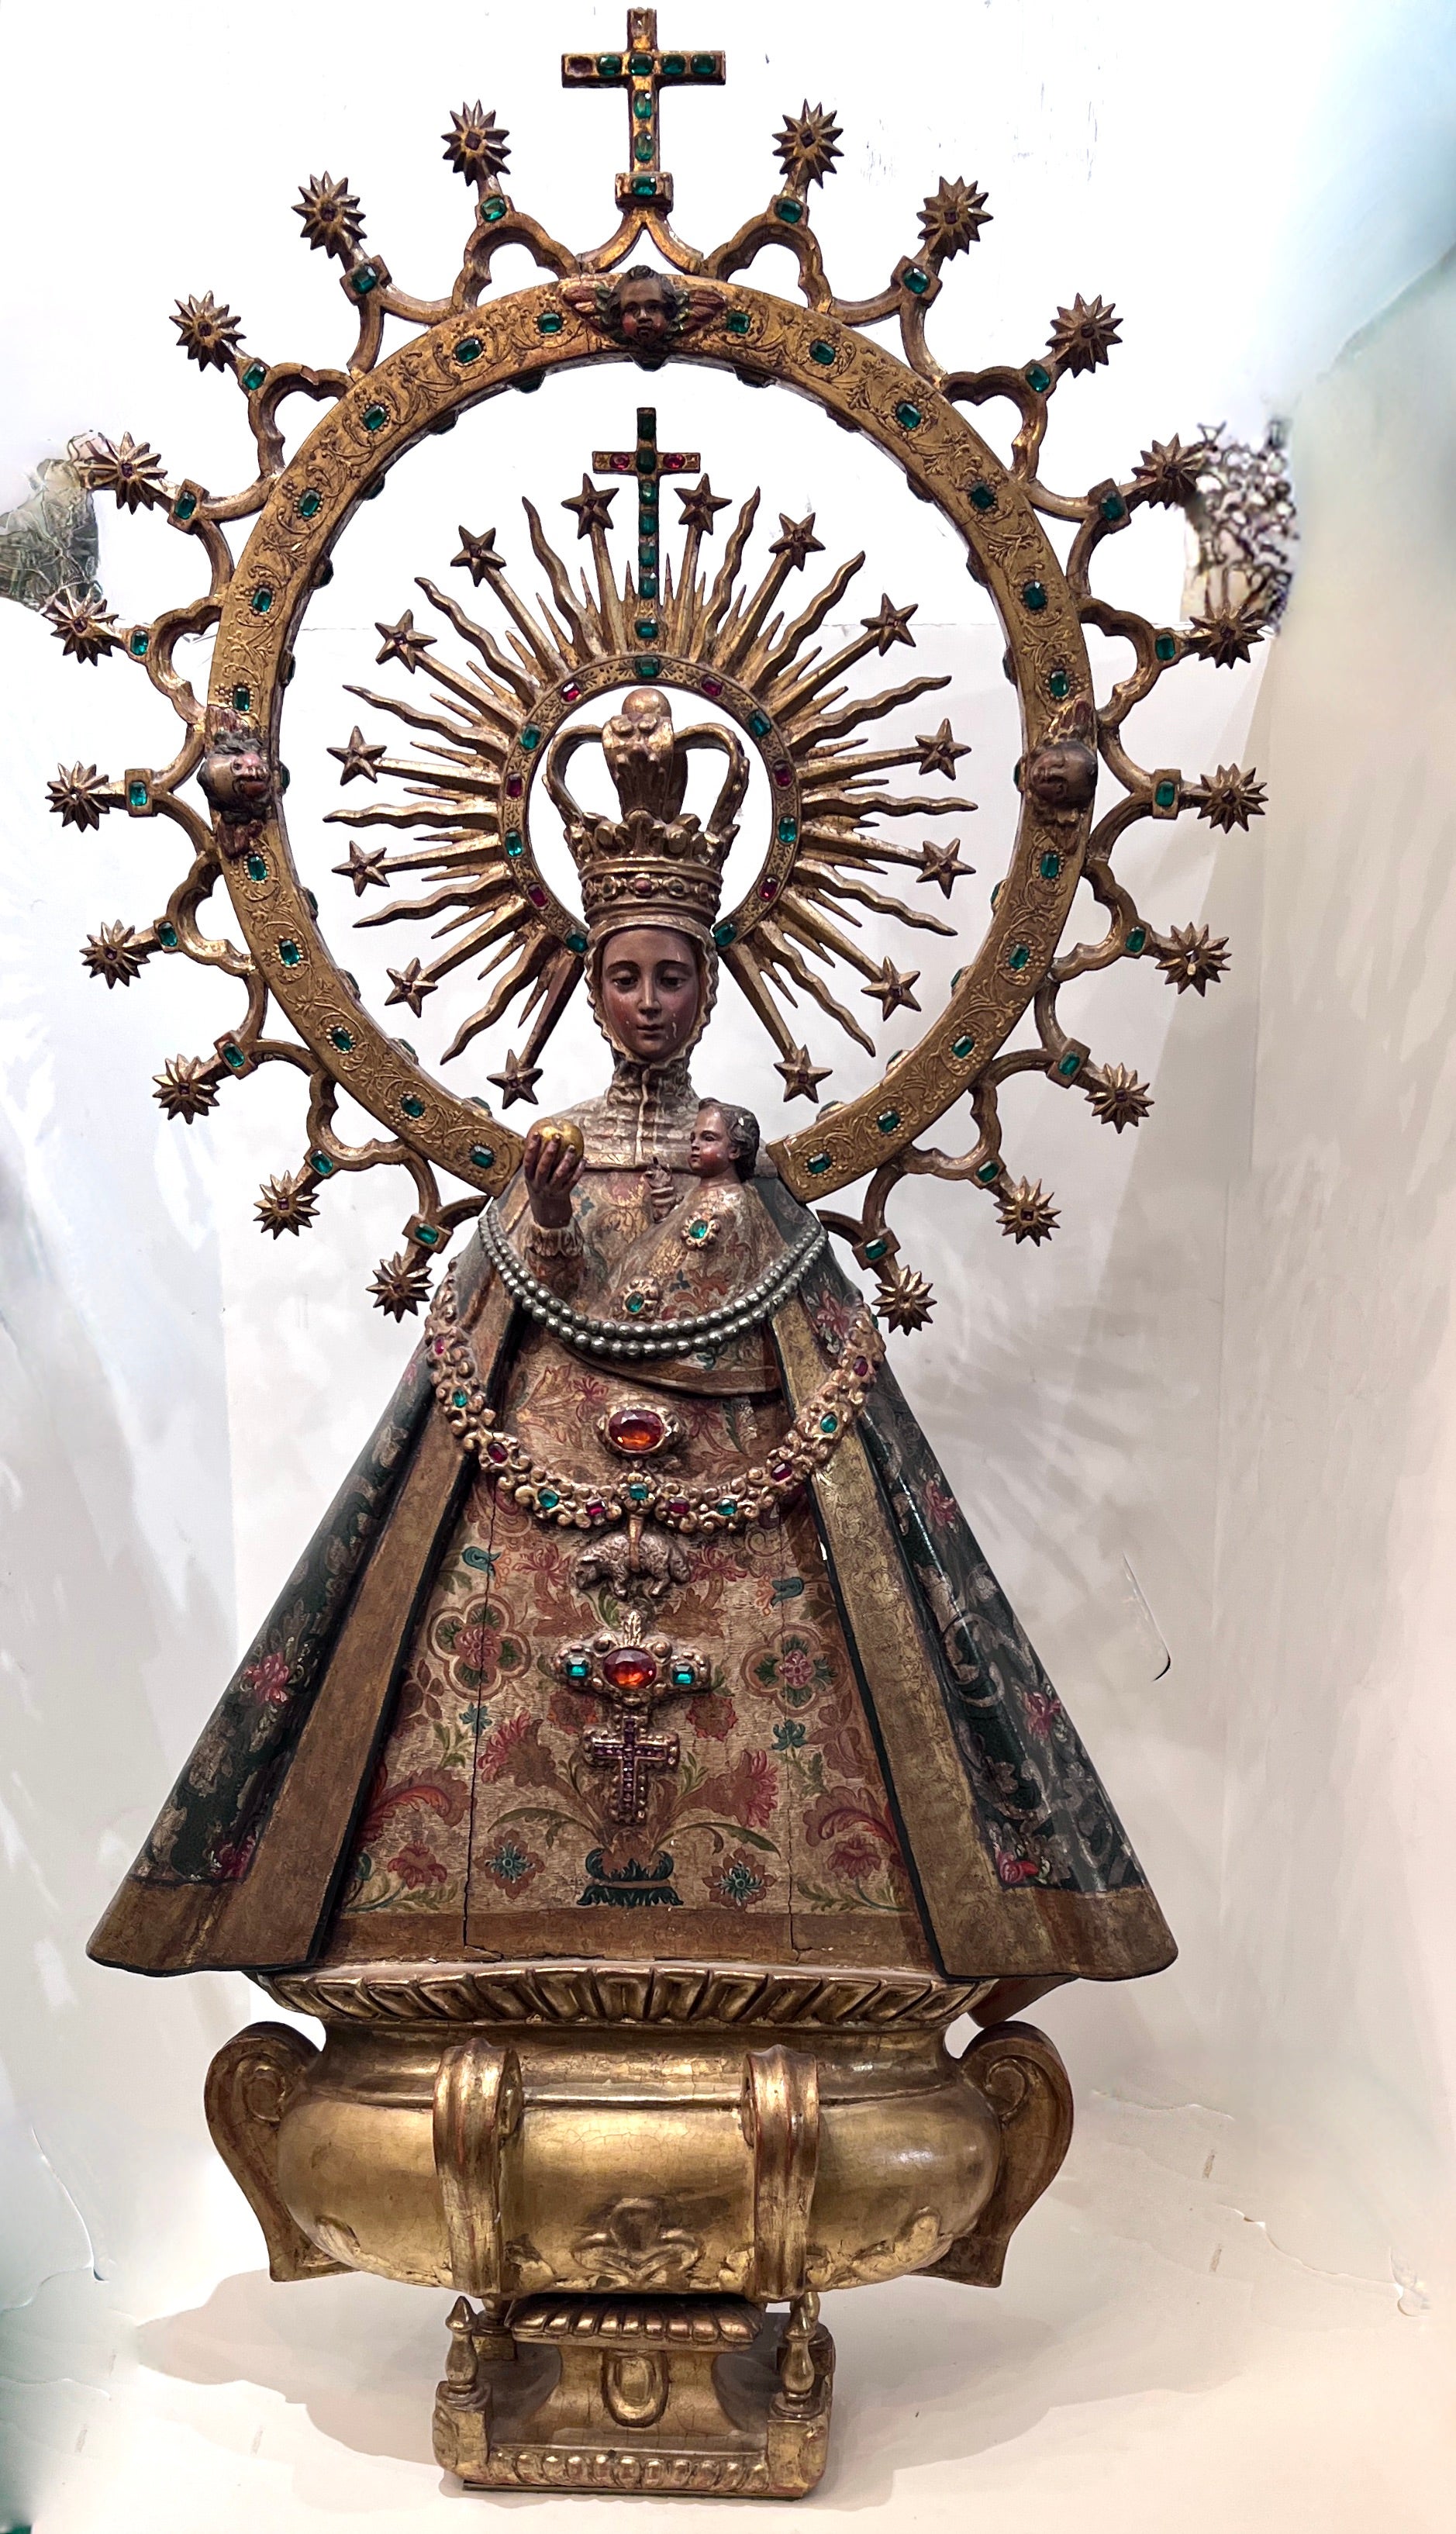 A Virgin Of Atocha - The Virgin Mary, 19th C. Wooden Sculpture believed to be from the 19th Century Mexico.

The piece is all hand crafted and quite large at 45